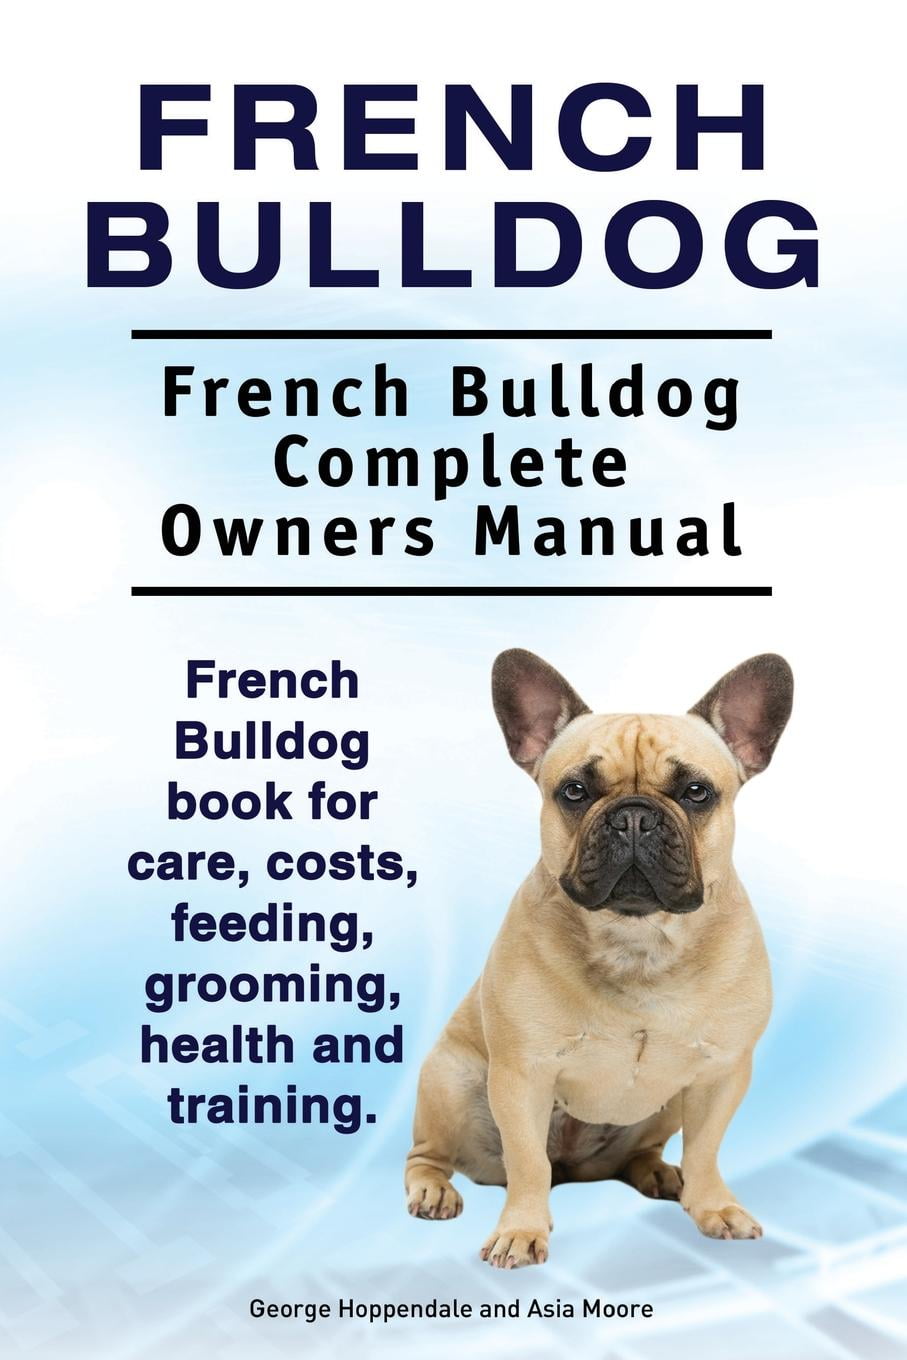 French Bulldog. French Bulldog Complete Owners Manual